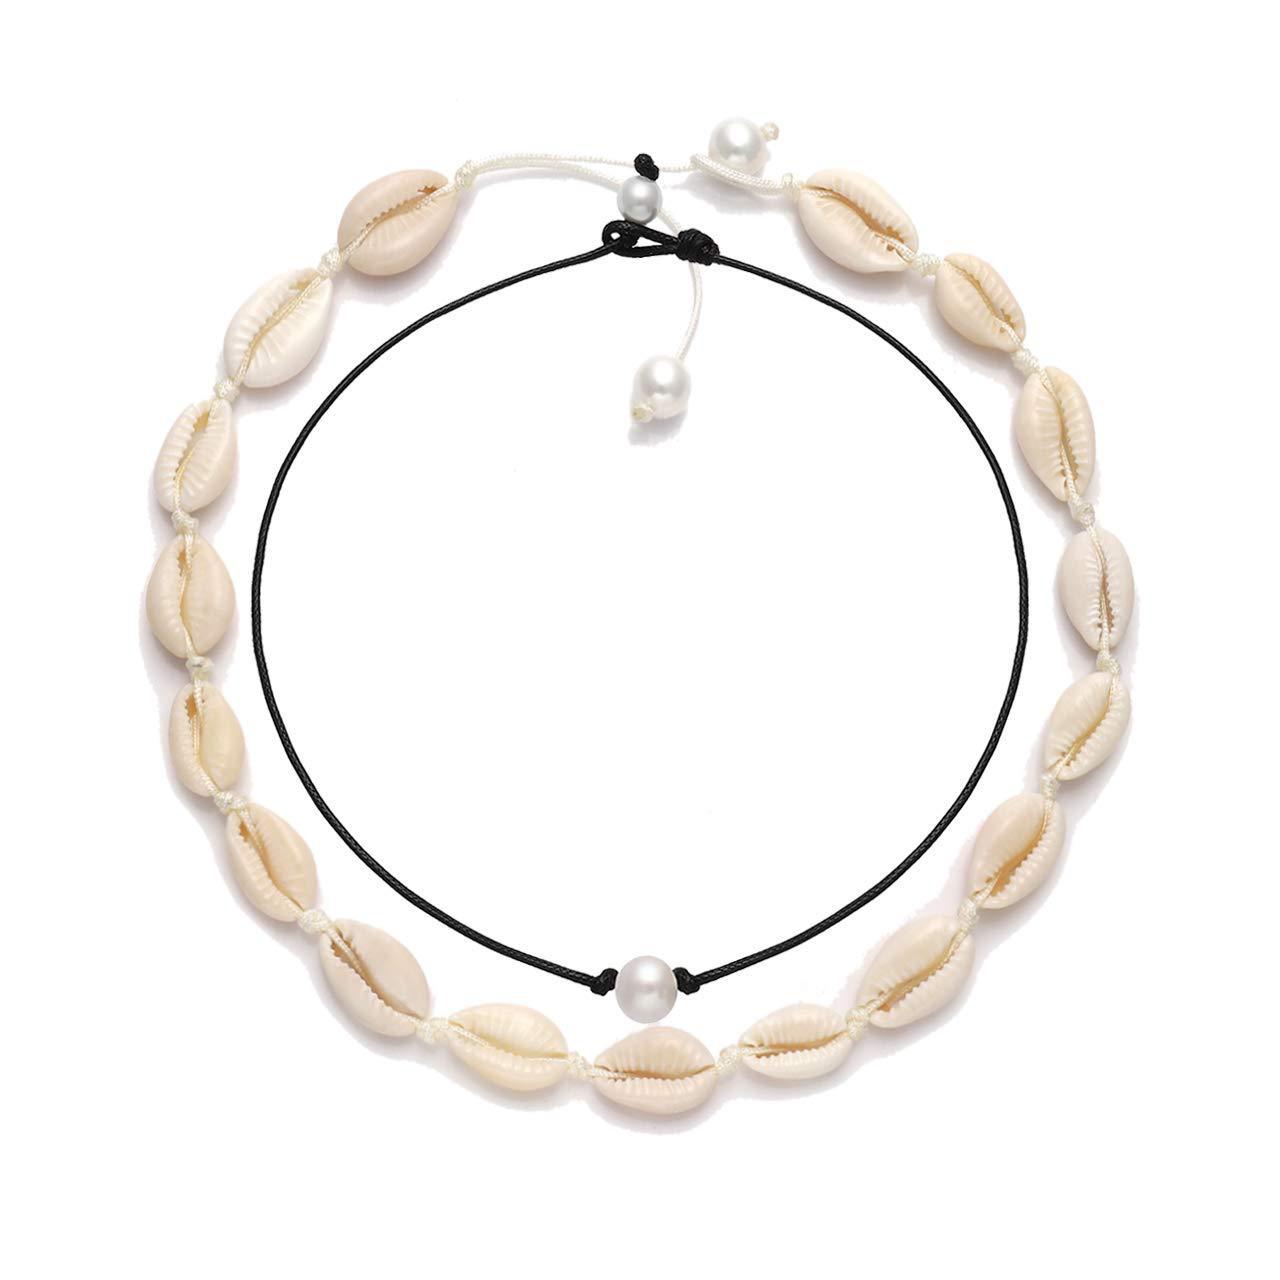 Europe and America Cross Border Hot Necklace Natural Shell Hand-Knit Necklace with Pearl Necklace Set Amazon Hot